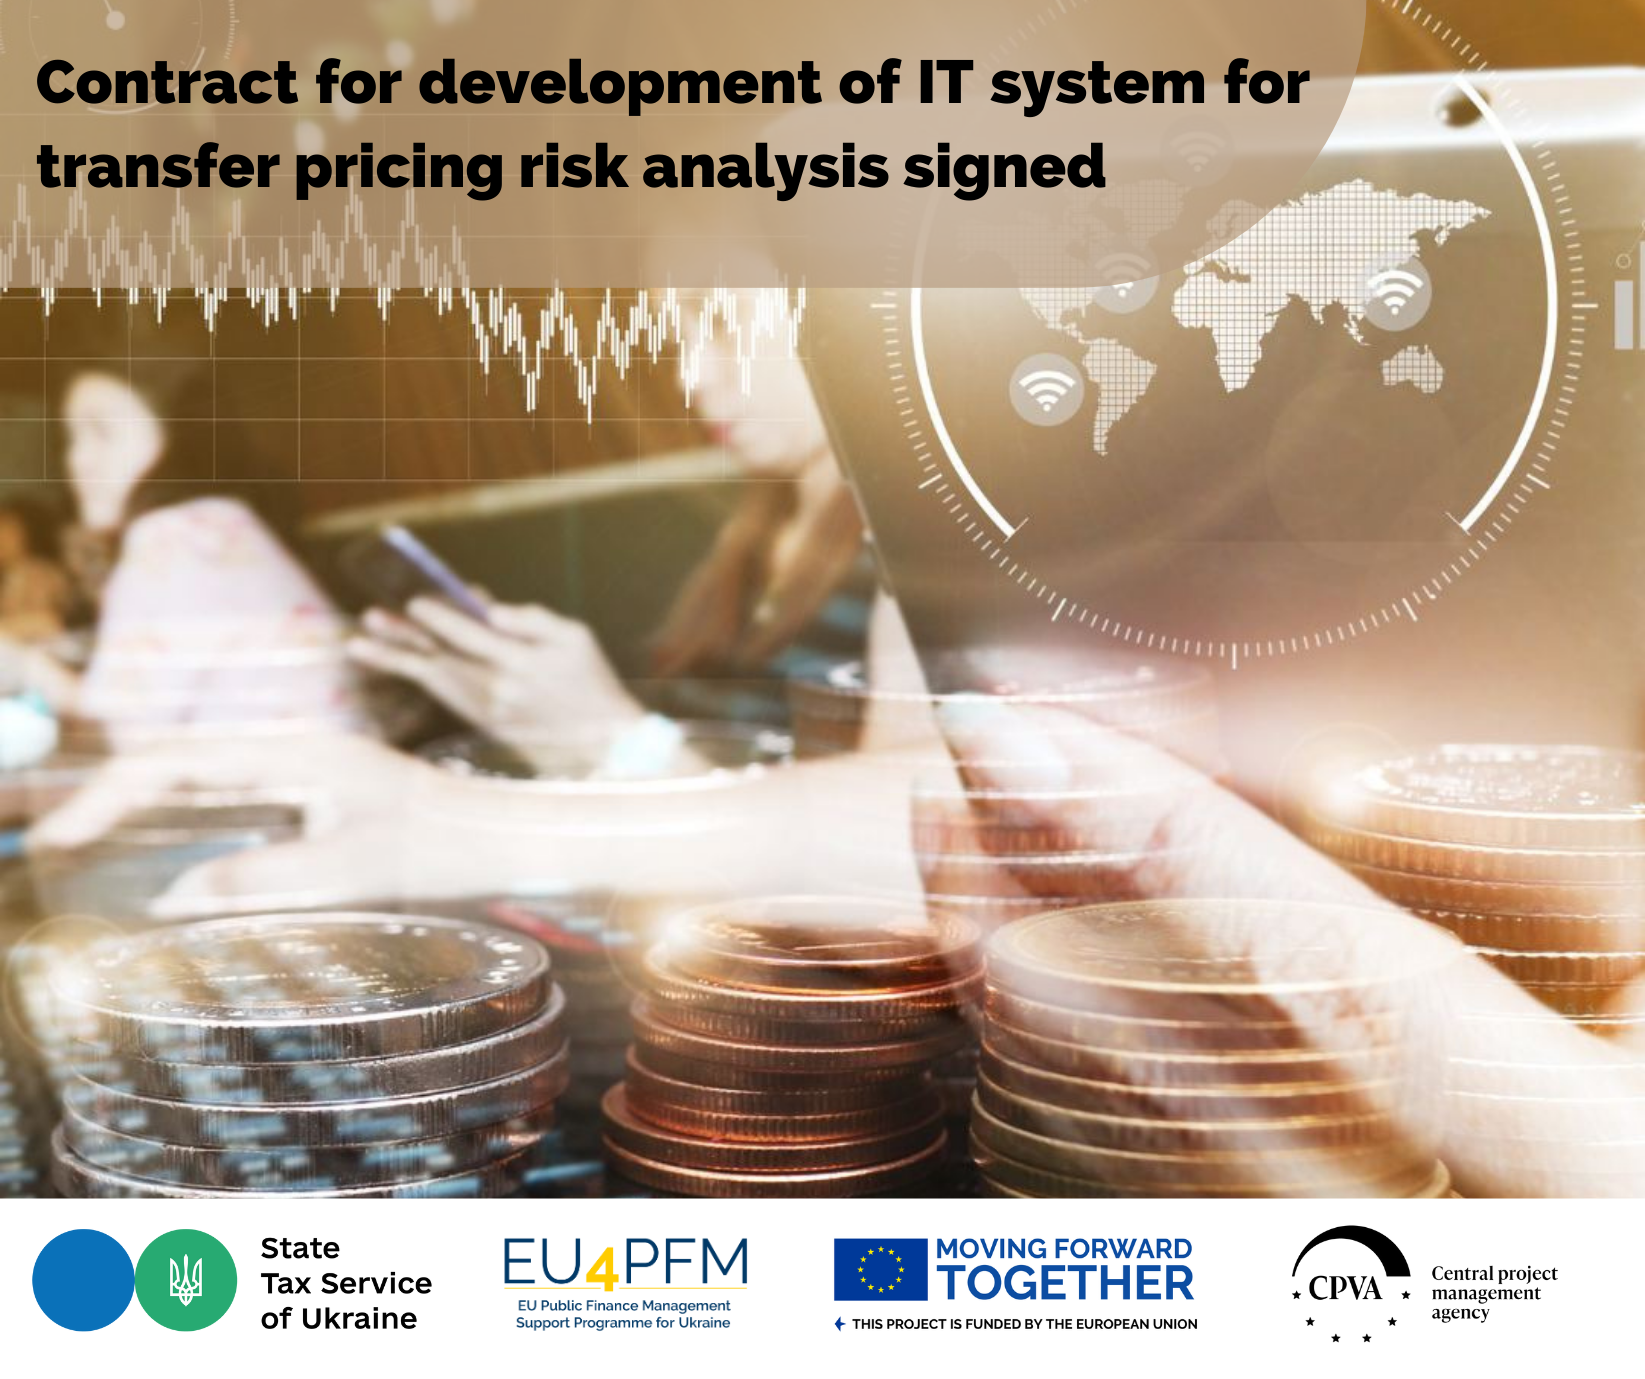 Contract for development of IT system for transfer pricing risk analysis signed